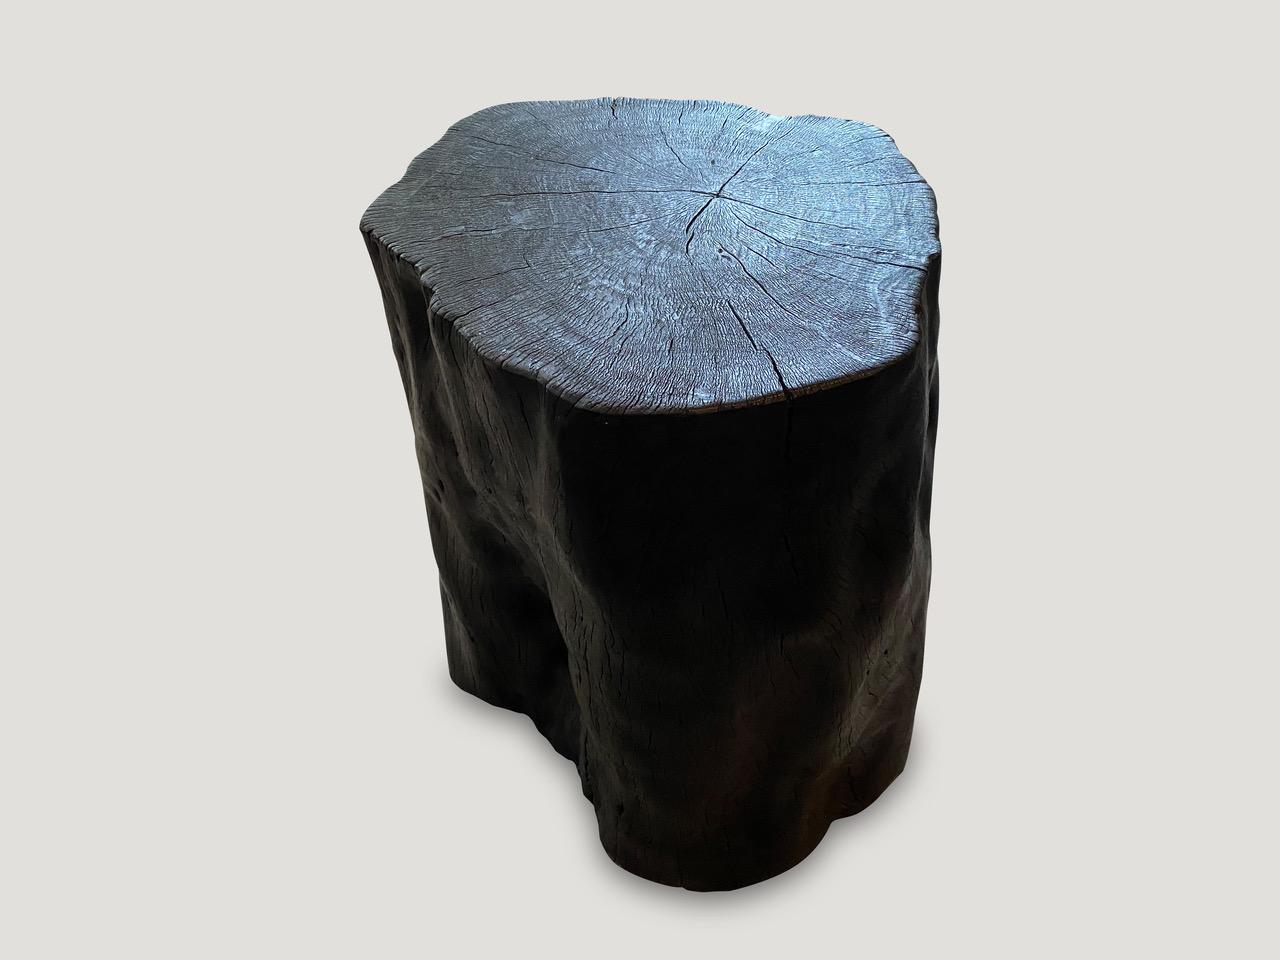 Reclaimed lychee wood side table. Burnt, sanded and sealed whilst respecting the natural organic shape and exposing the beautiful grain of the wood. We have a collection. All unique. The price and size reflect the one shown.

The Triple Burnt